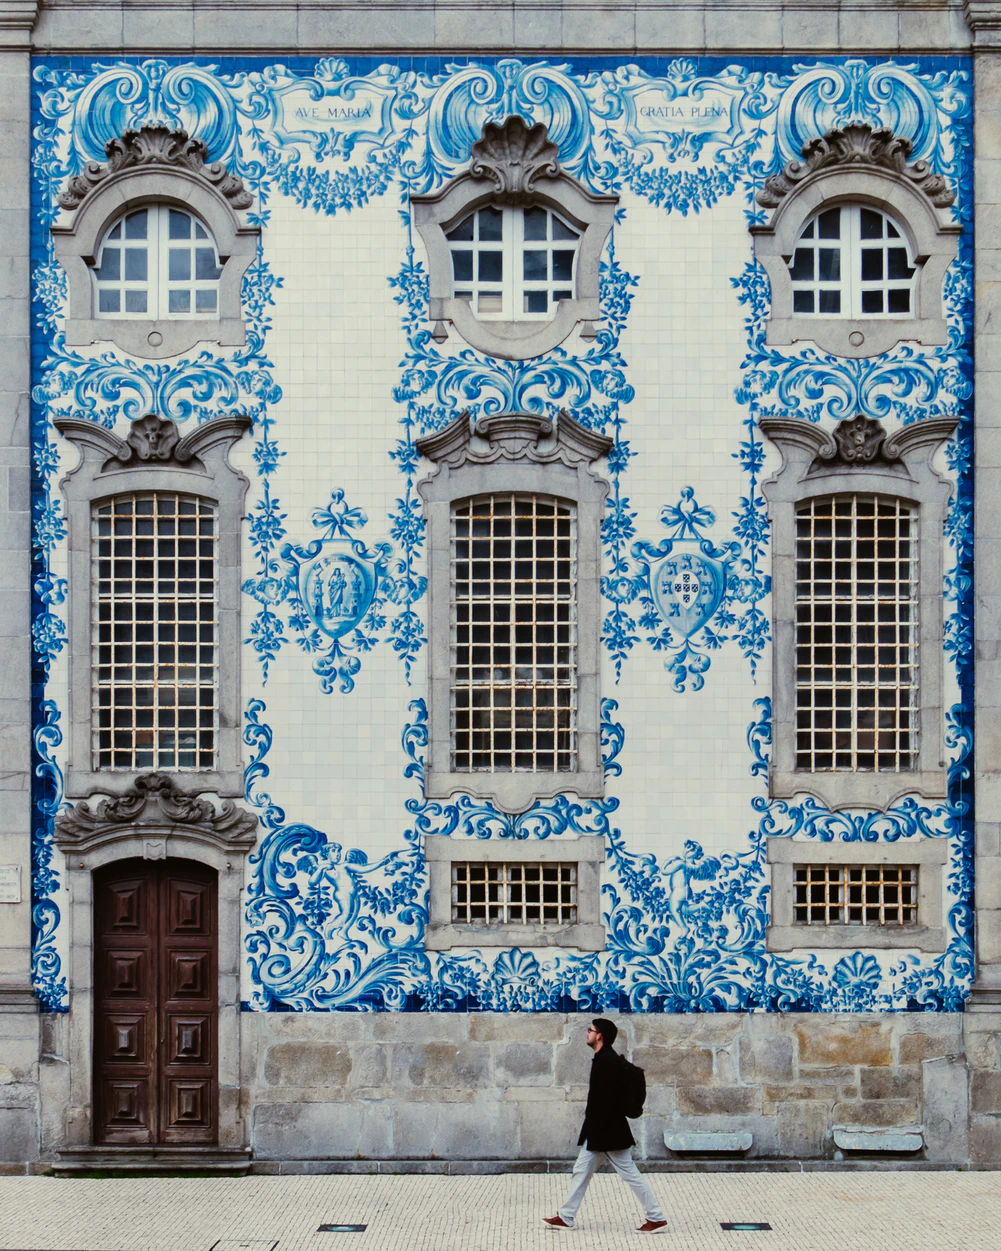 Man walking next to blue building in Porto, Portugal